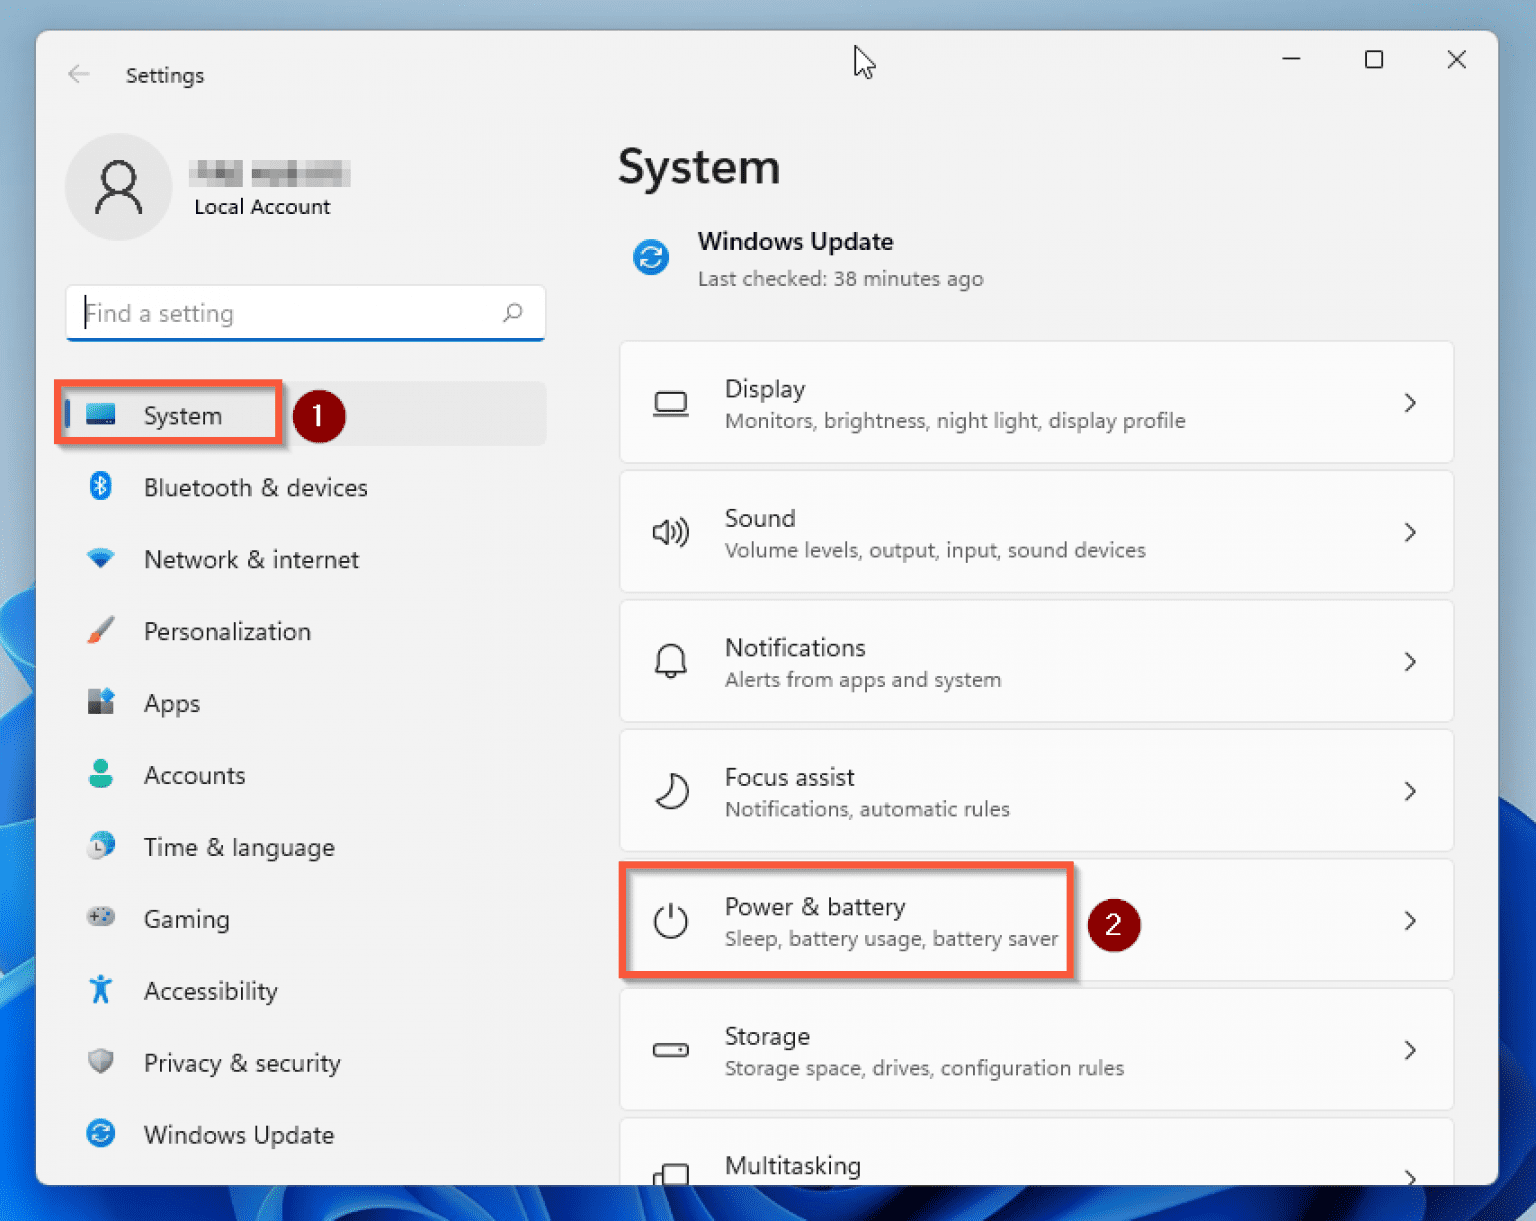 How To Use Alarms In Windows 11 - Itechguides.com